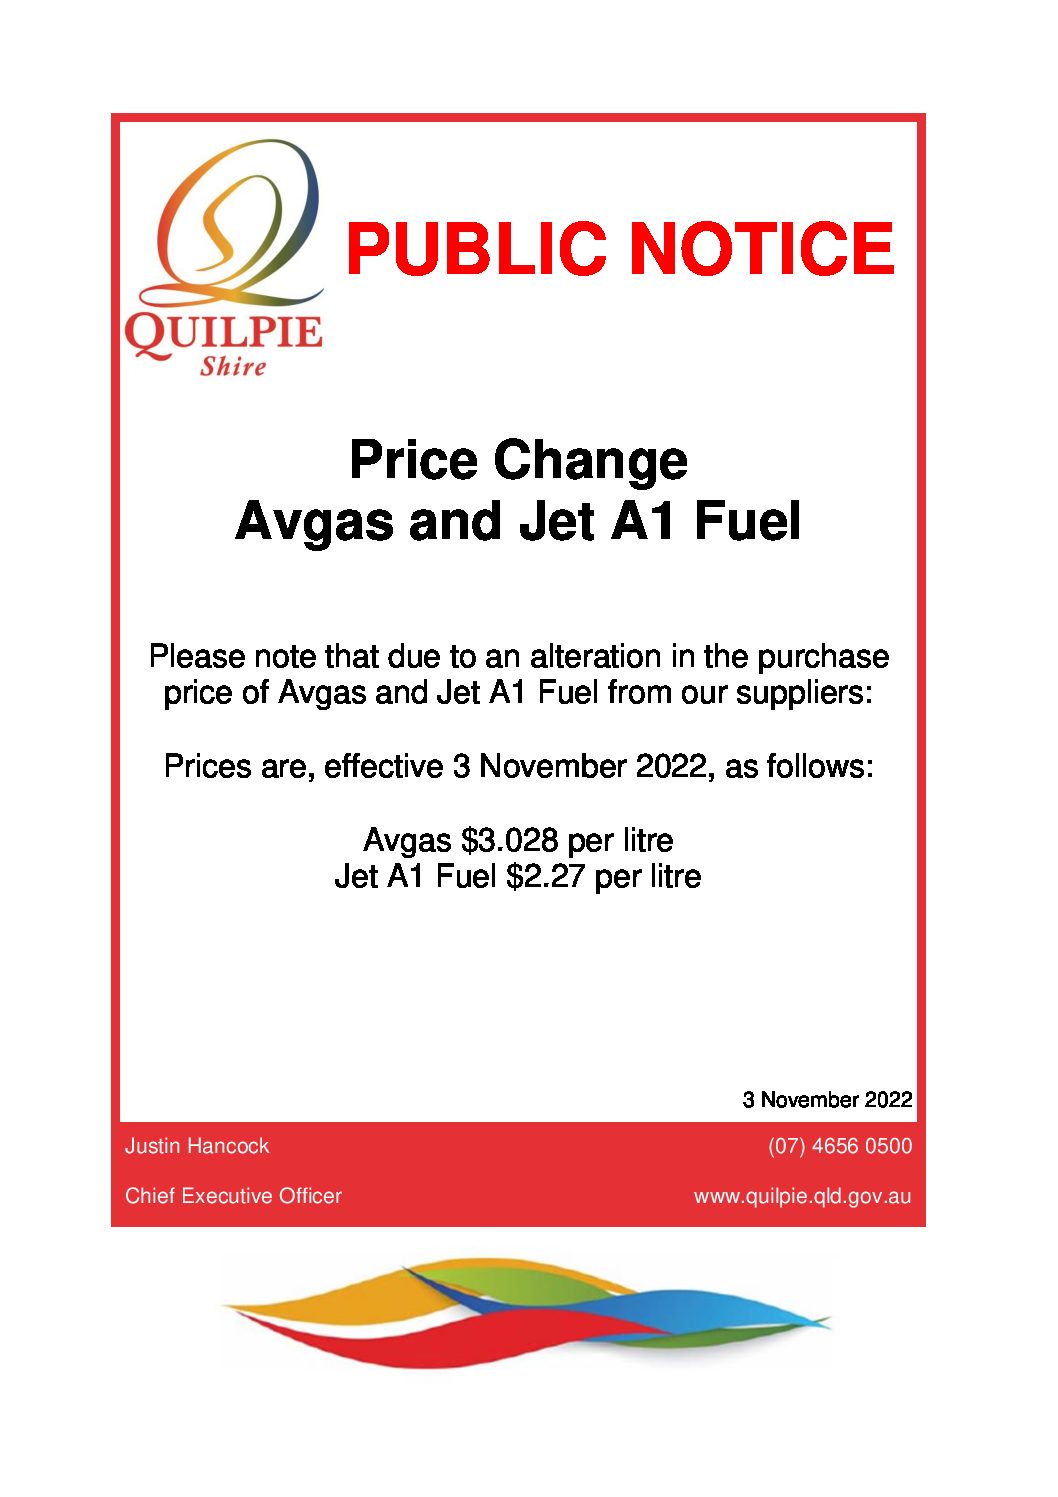 Avgas and Jet A1 Fuel Prices